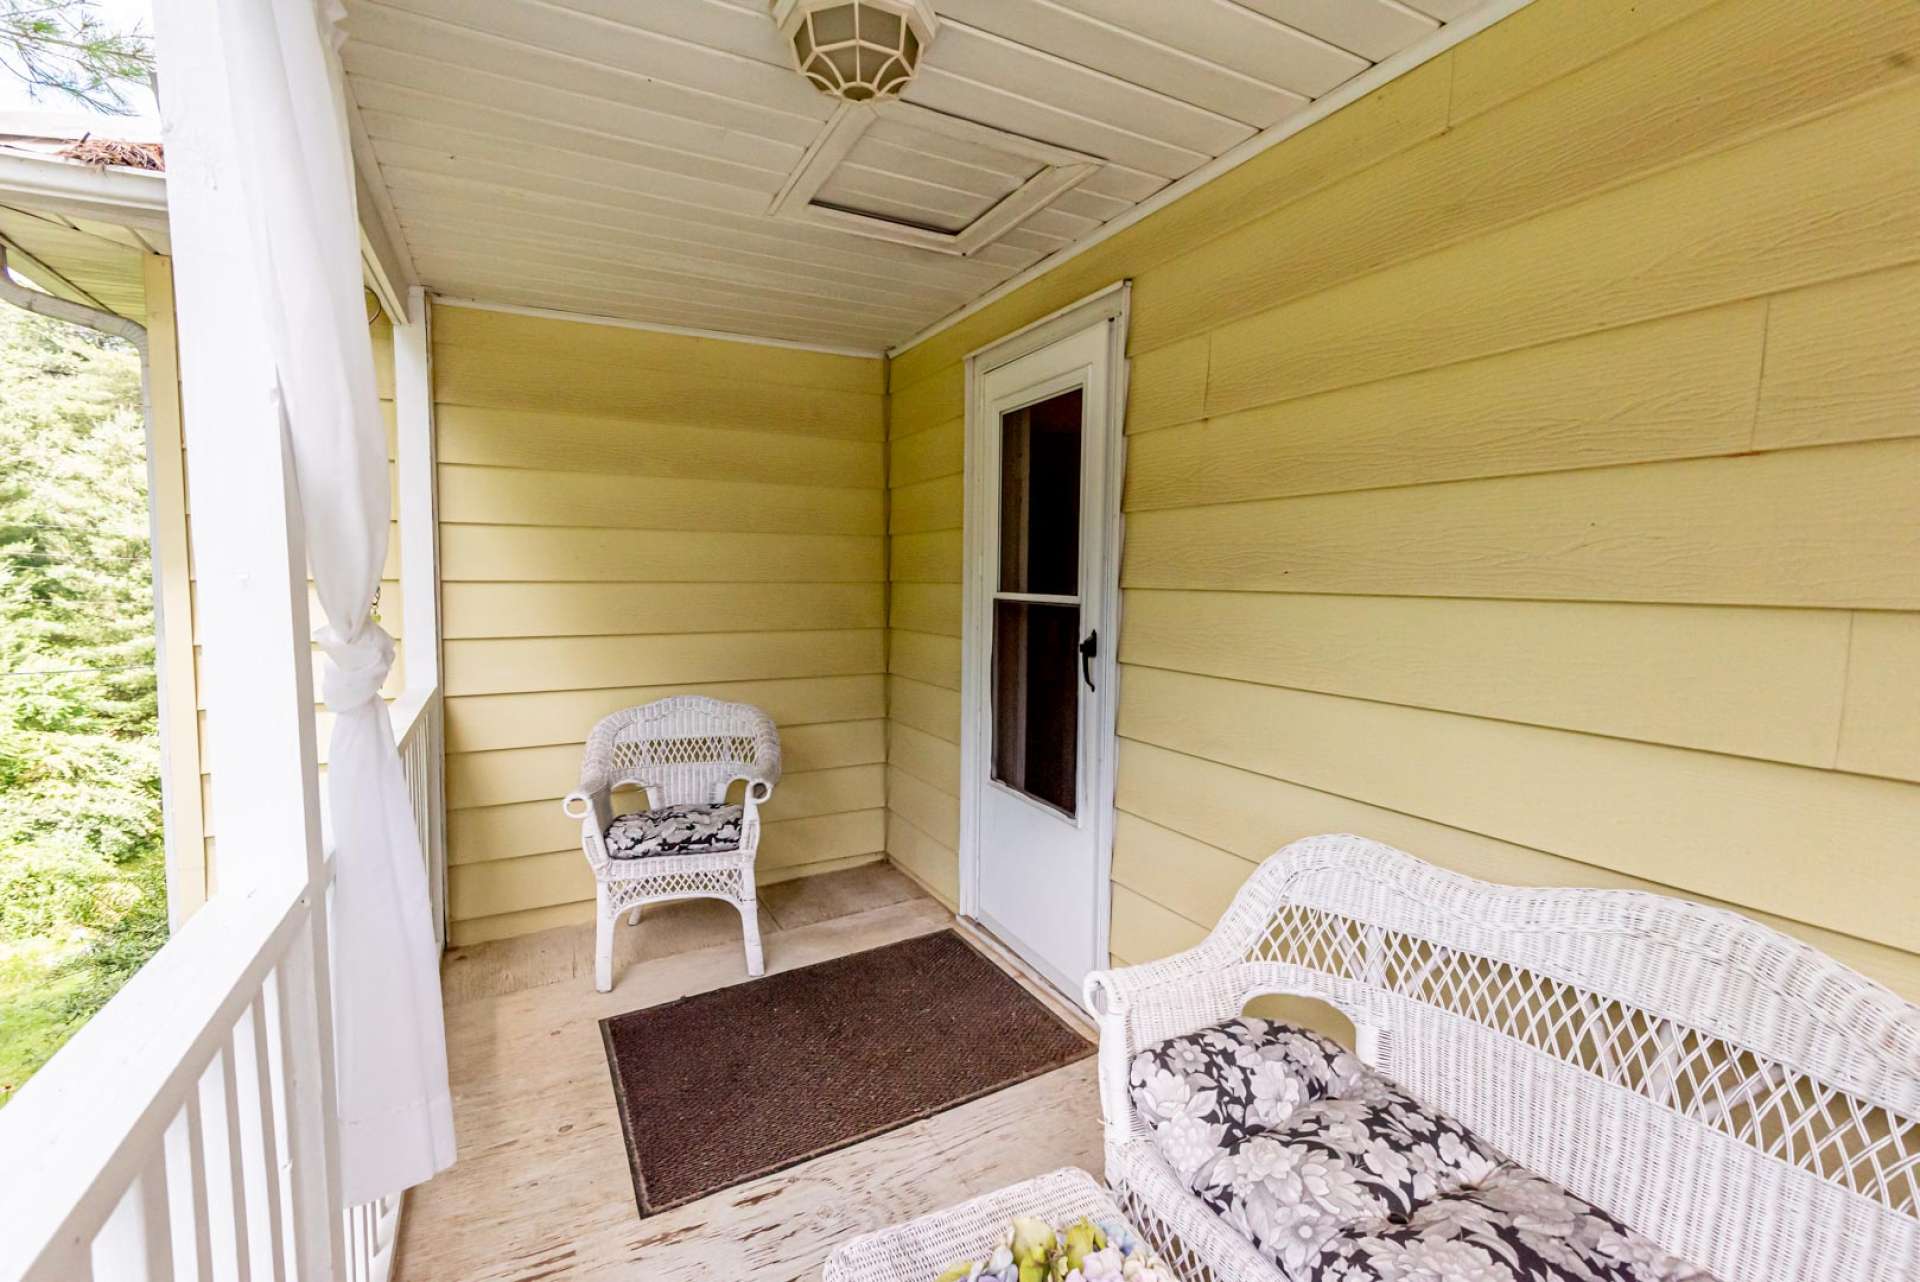 A welcoming front porch invites you to sit for a while and enjoy the fresh mountain air.